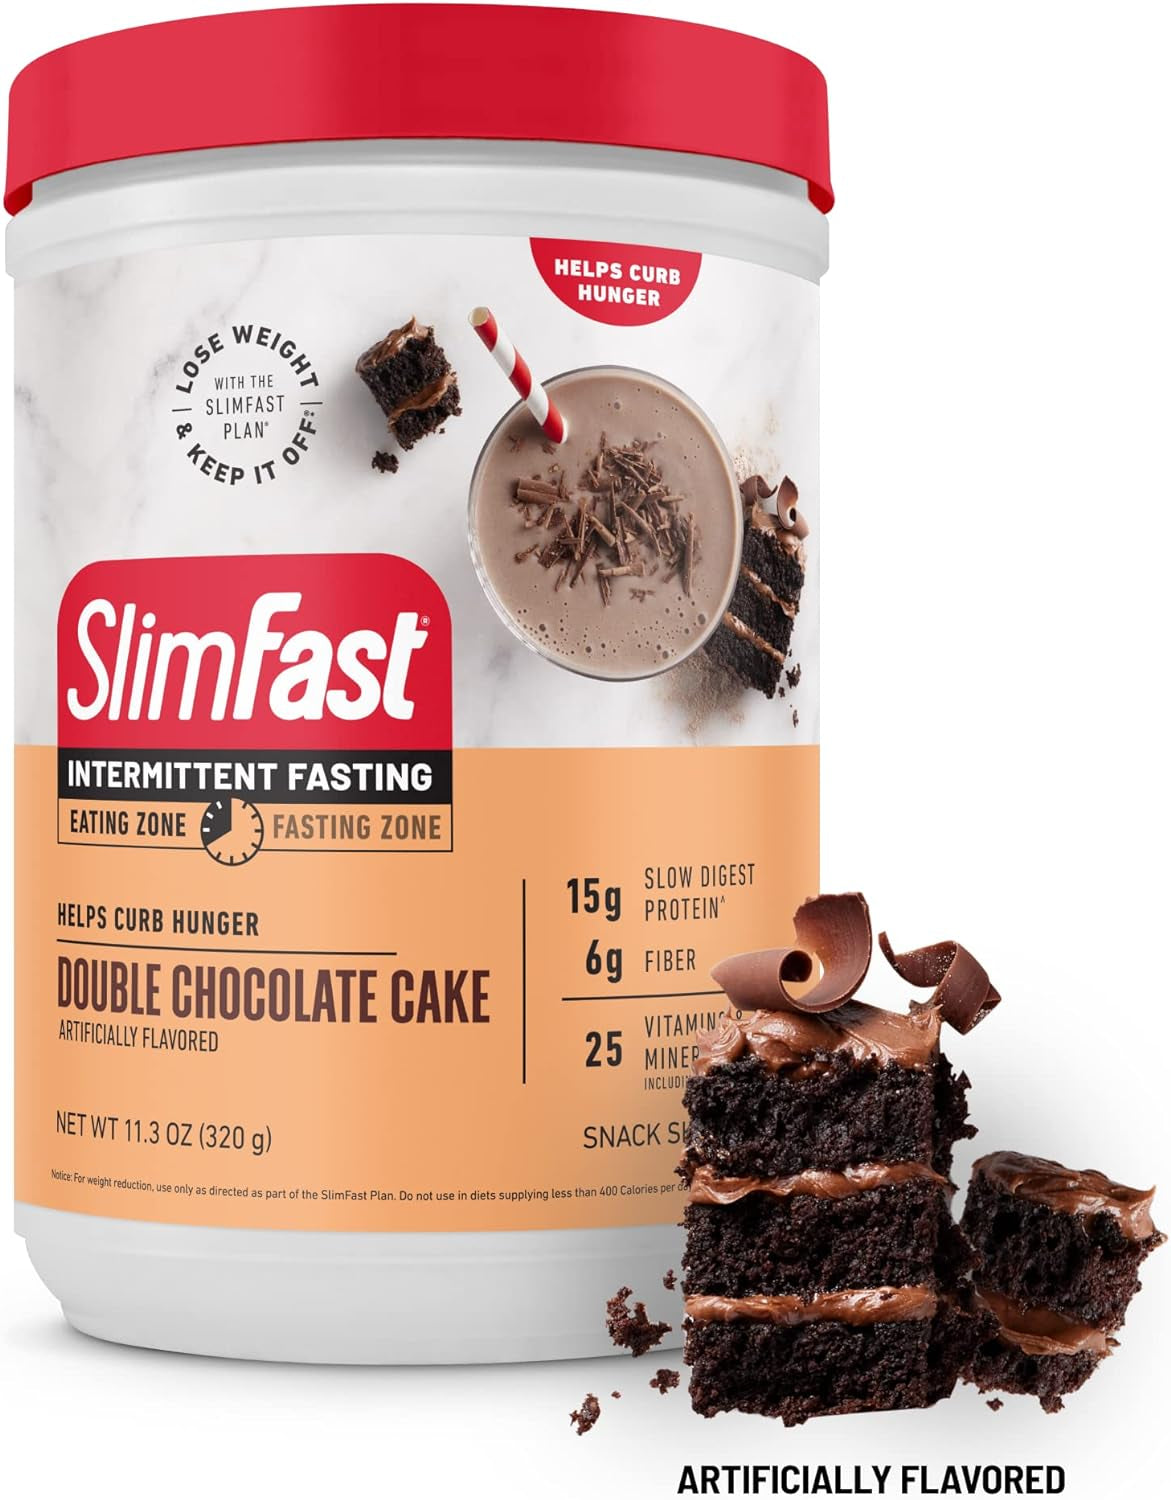 Slimfast Intermittent Fasting, Casein Protein Powder, Biotin with Vitamin & Mineral Bend, with Fiber, No Added Sugar, Snack Shake Mix- Double Chocolate Cake, 10 Servings (Pack of 2)